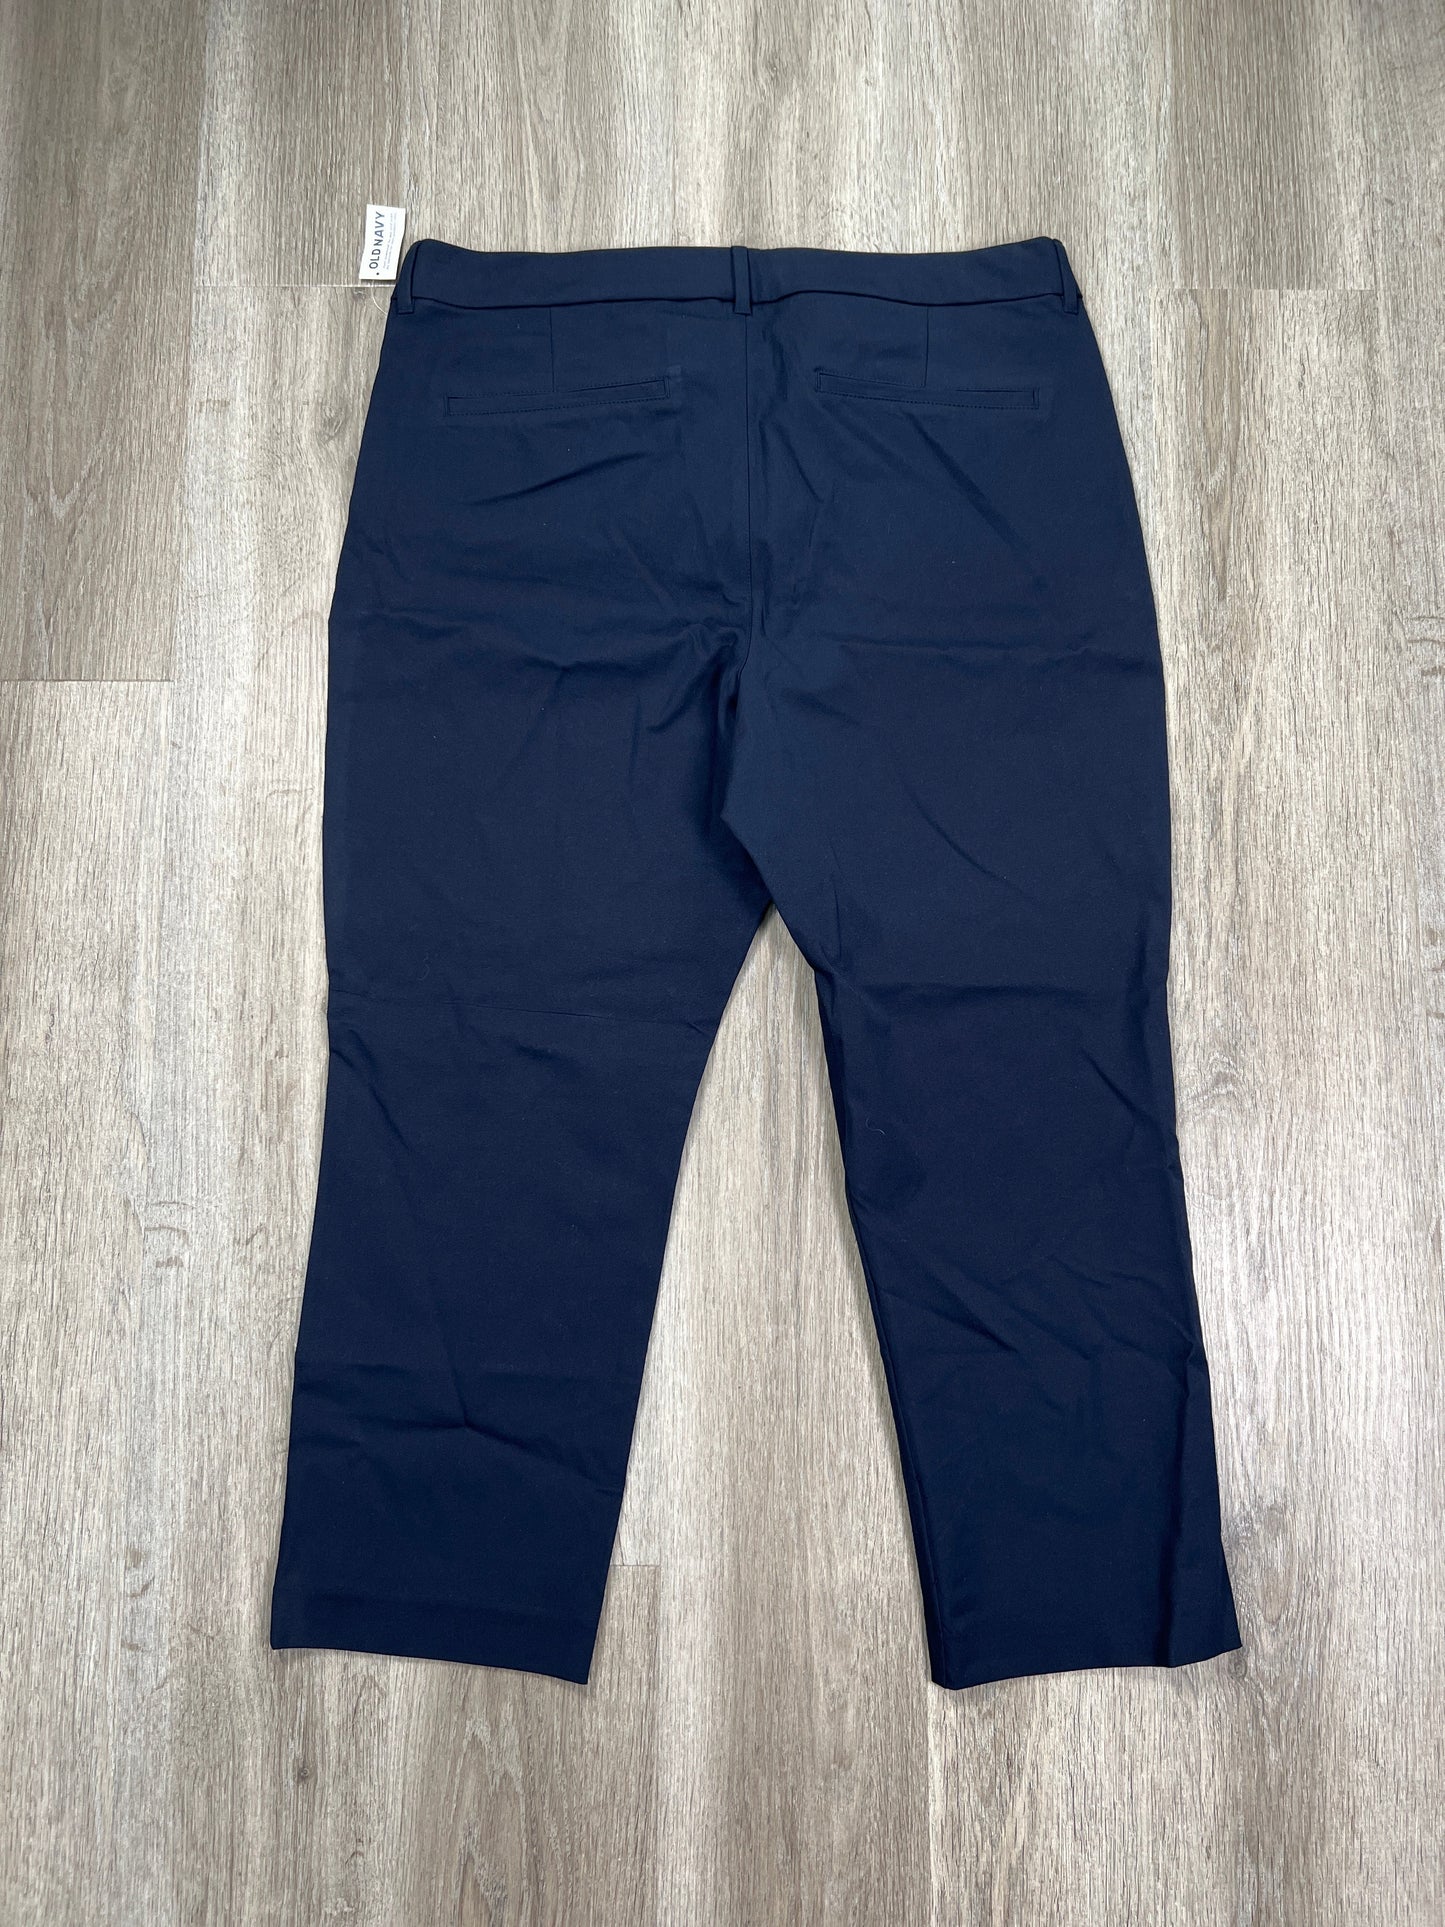 Navy Pants Cropped Old Navy, Size 18